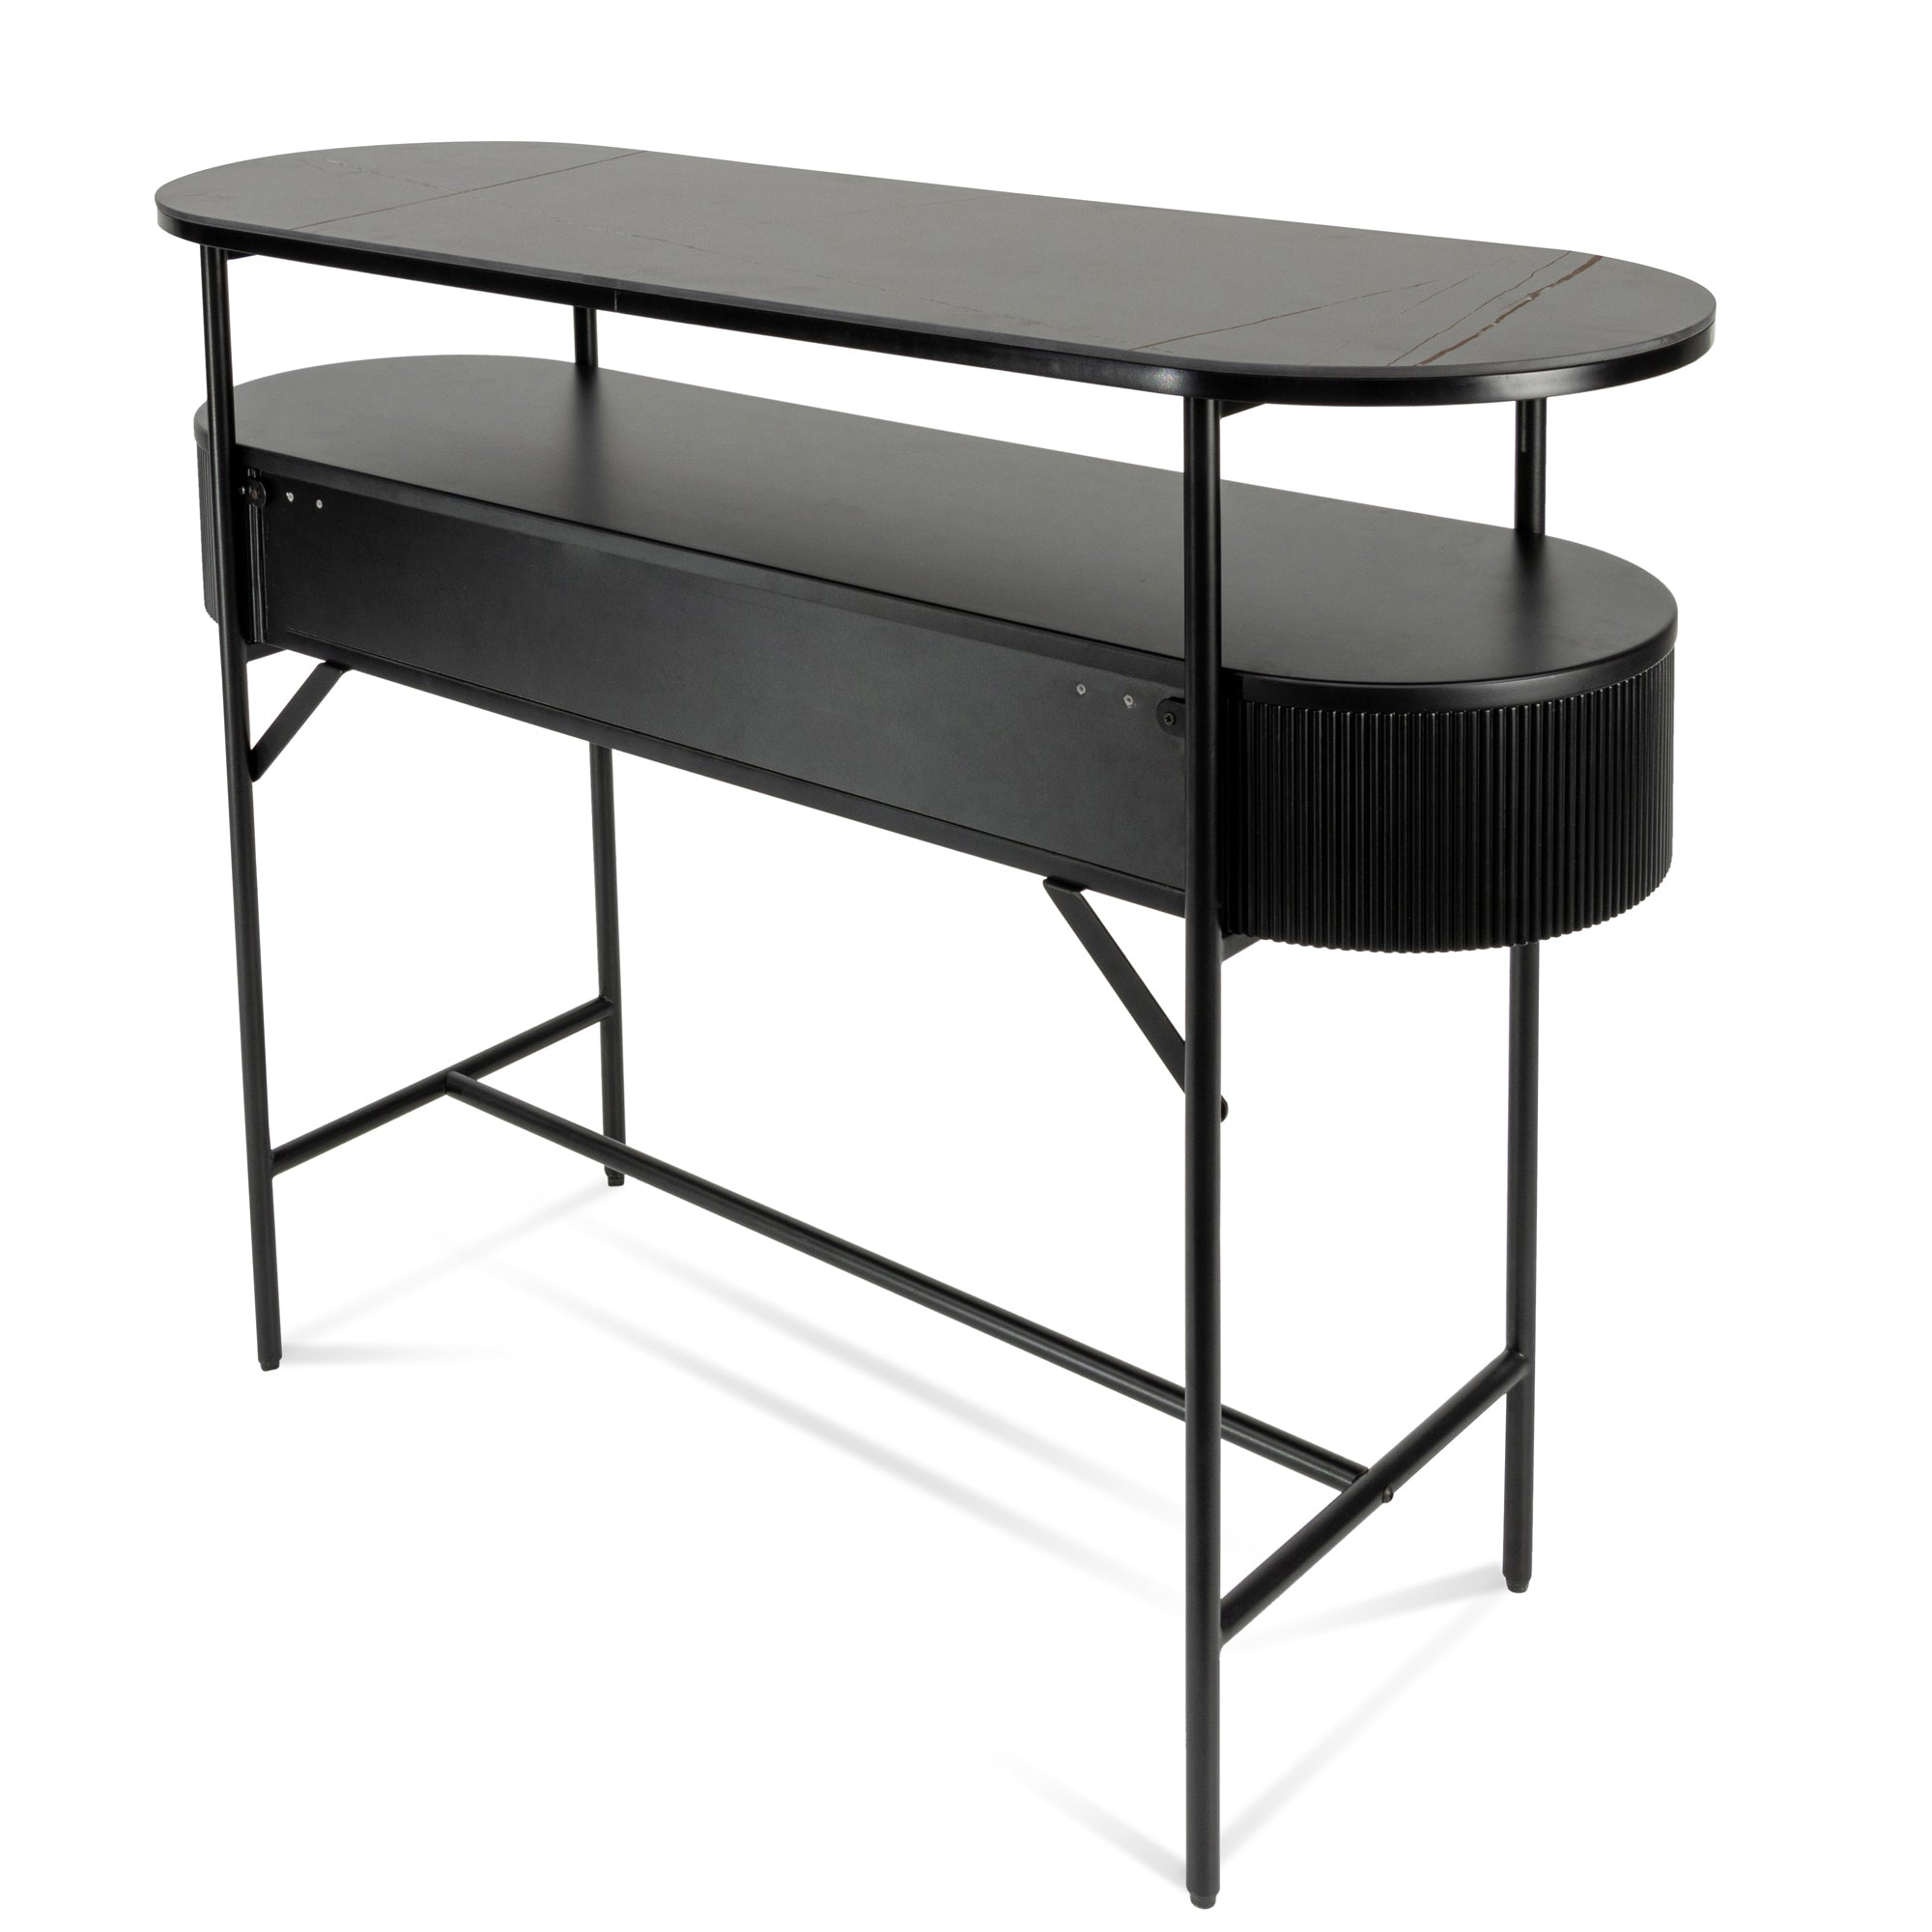 Melina Stone Top Console Table - Black - Console